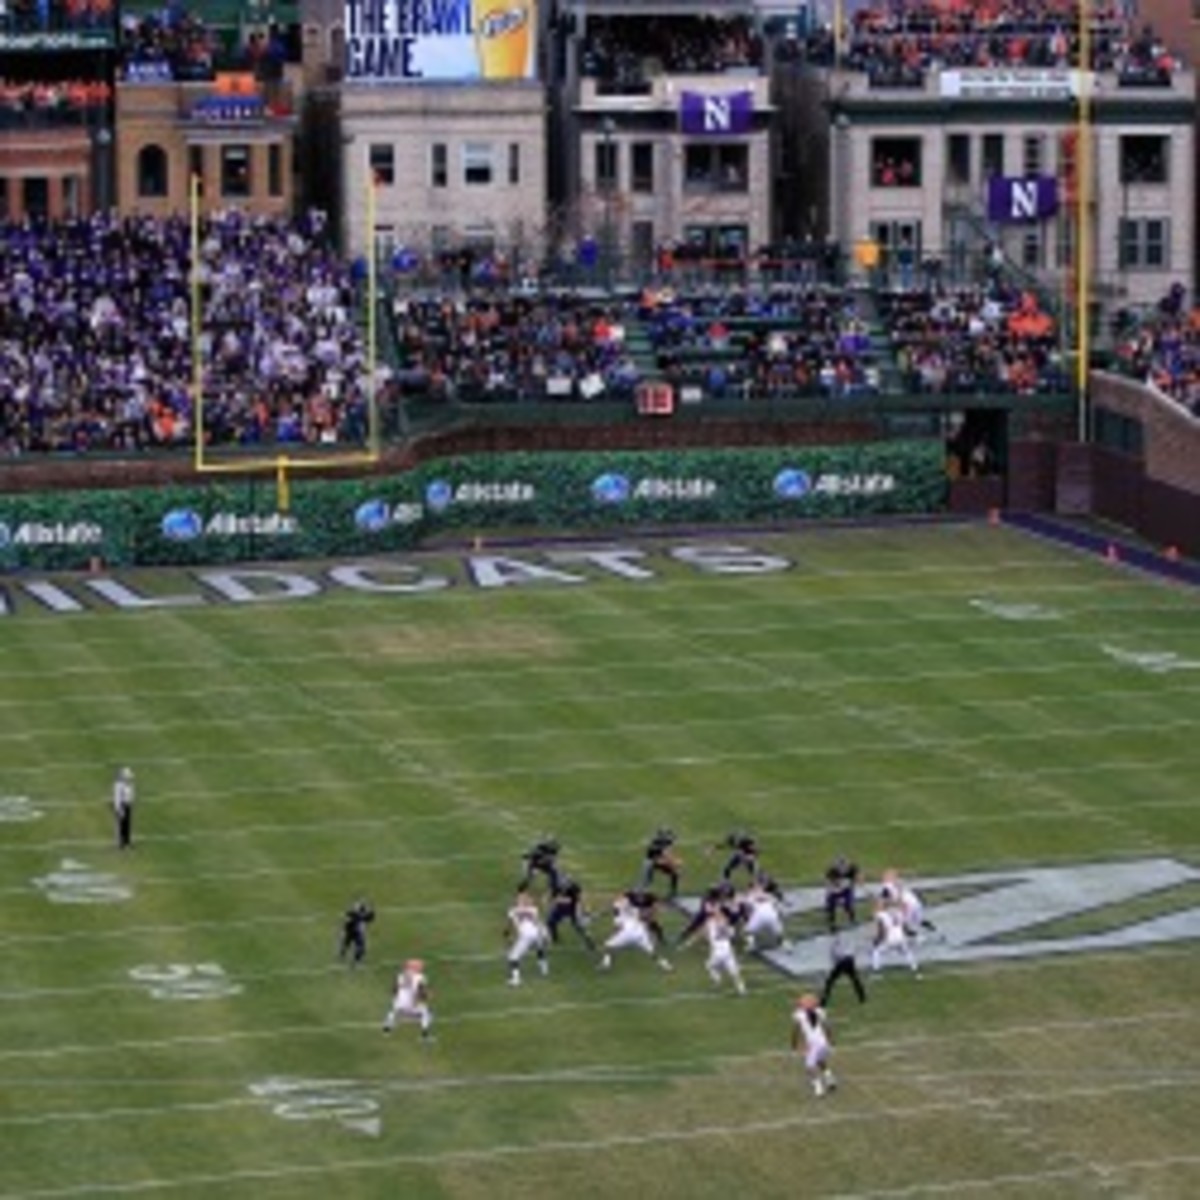 Northwestern reportedly will play more football games at Wrigley Field. (Jonathan Daniel/Getty Images)